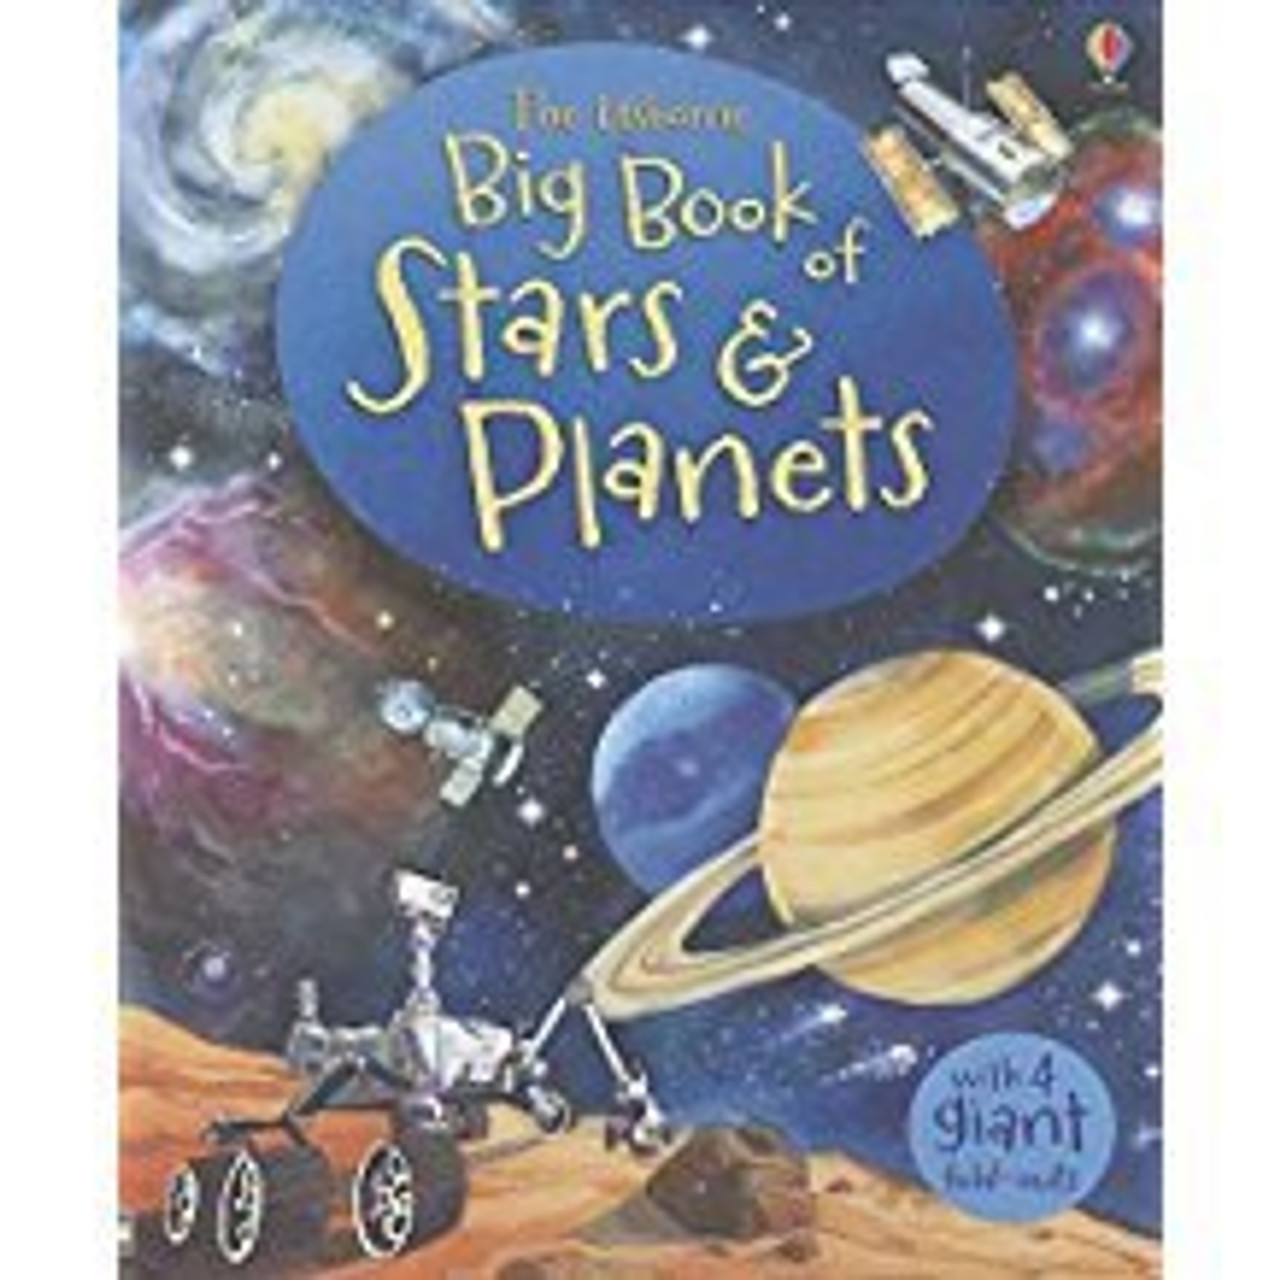 BIG BOOK OF STARS & PLANETS (HB)